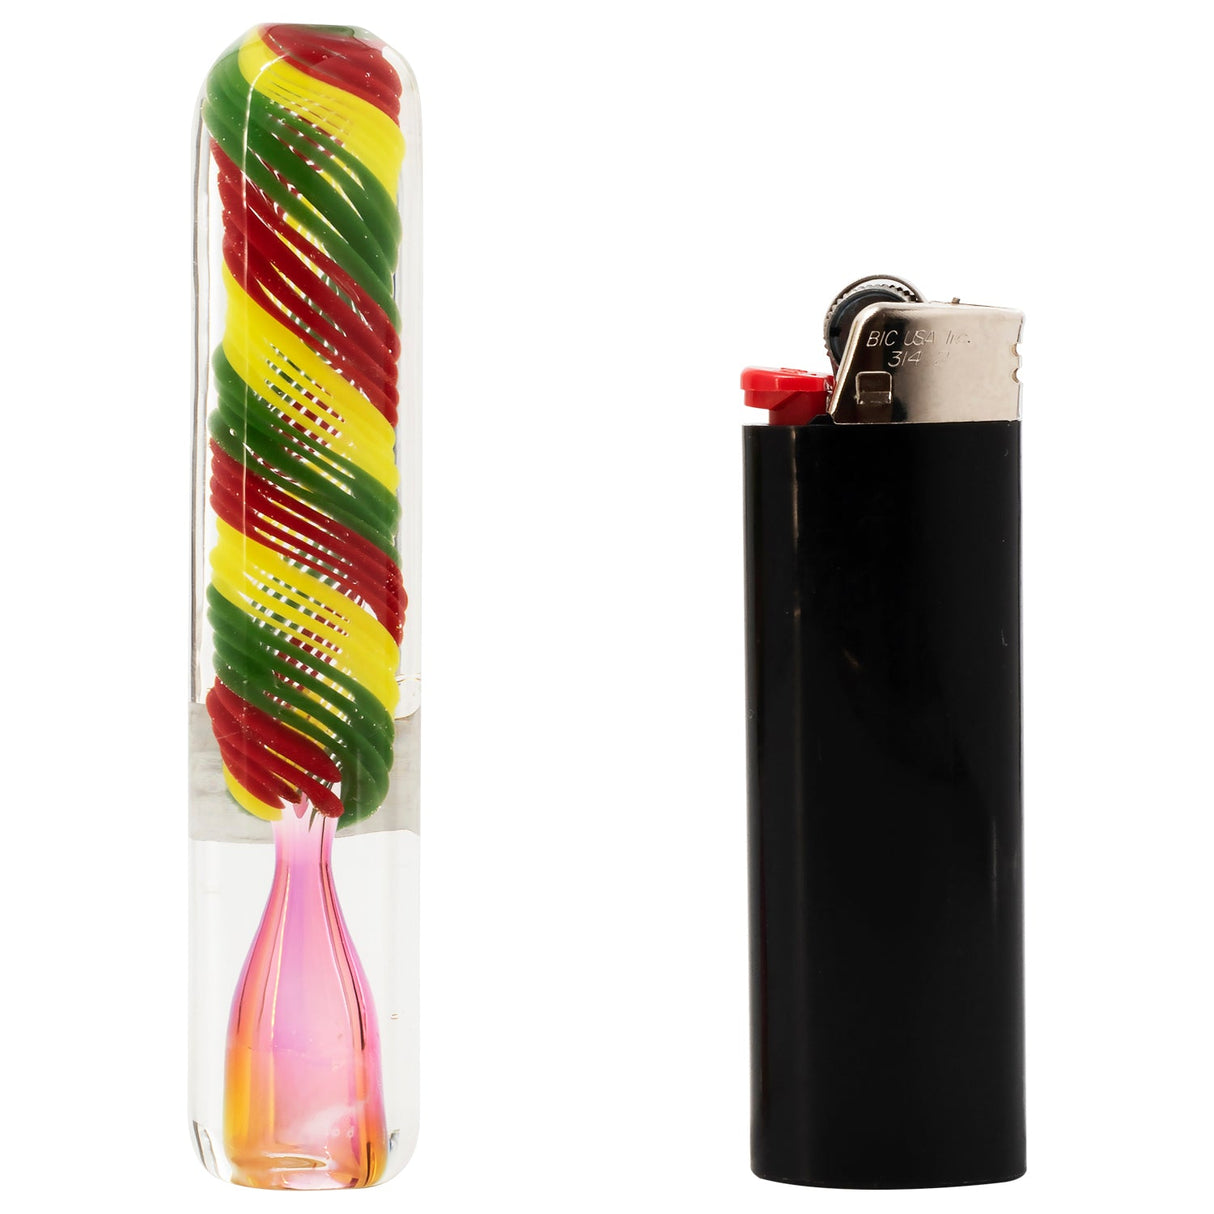 LA Pipes "Rasta Twister" Chillum Pipe with Fumed Color Changing Design, 3.25" Length, next to lighter for scale